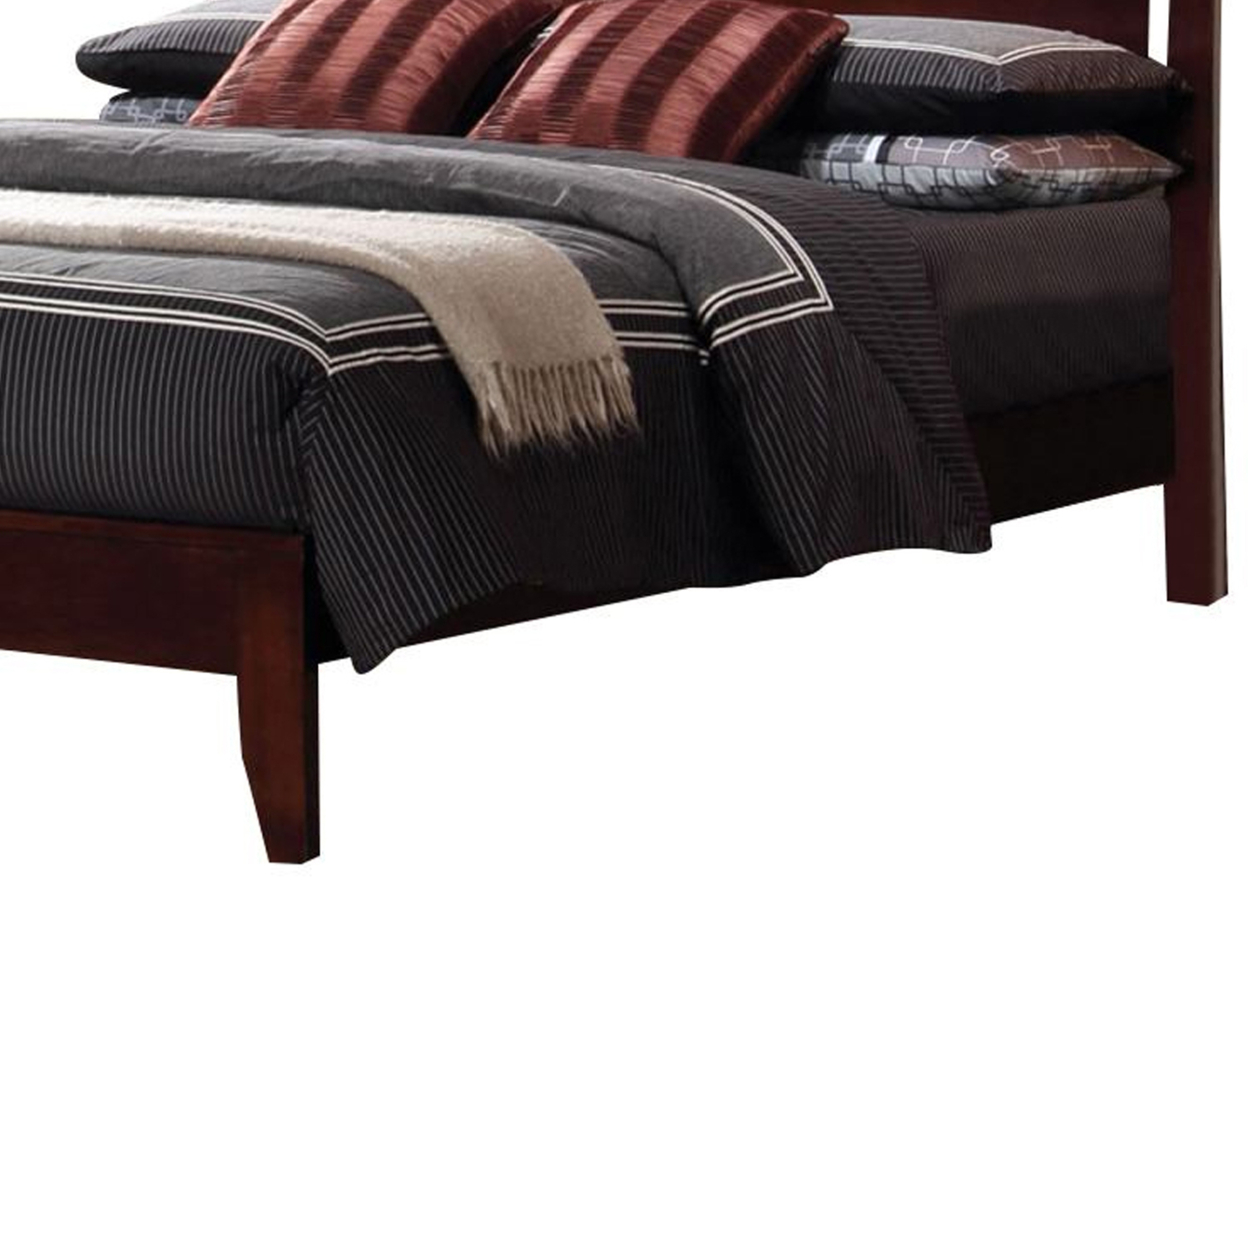 Transitional Wooden Queen Size Bed With Slatted Style Headboard, Brown- Saltoro Sherpi